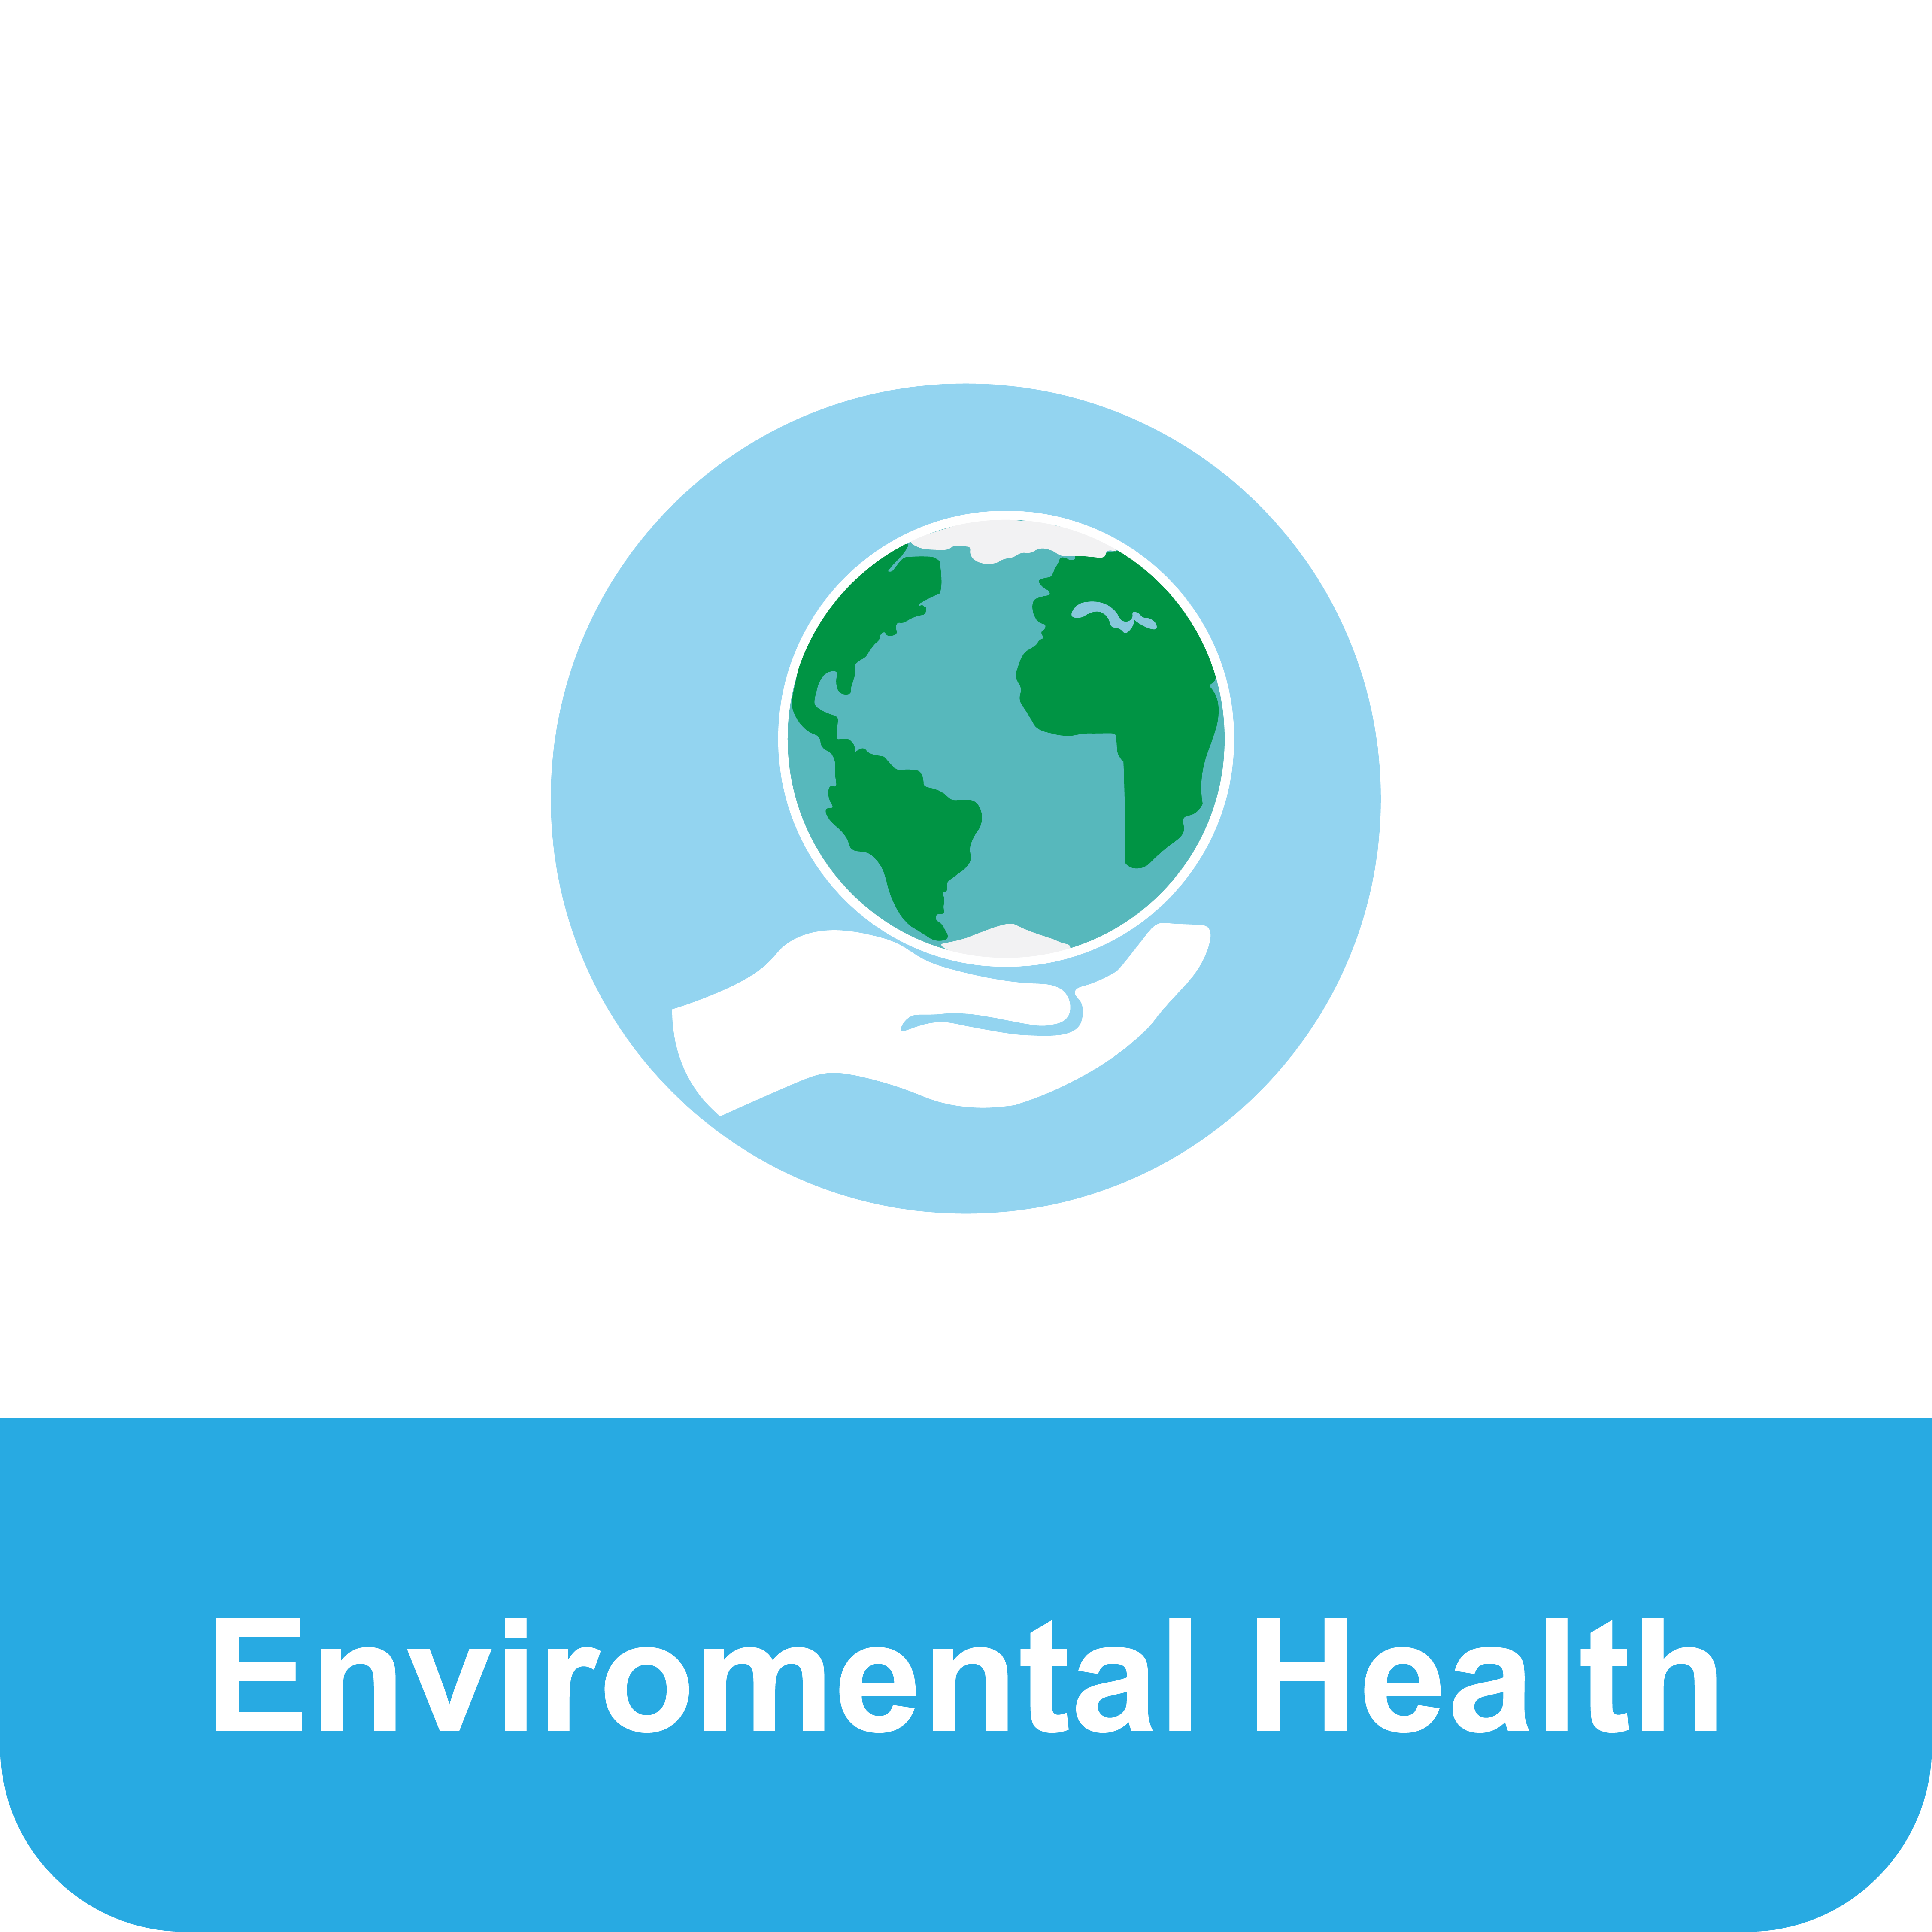 Title that reads "Environmental Health" under an icon of Earth being held by a hand.